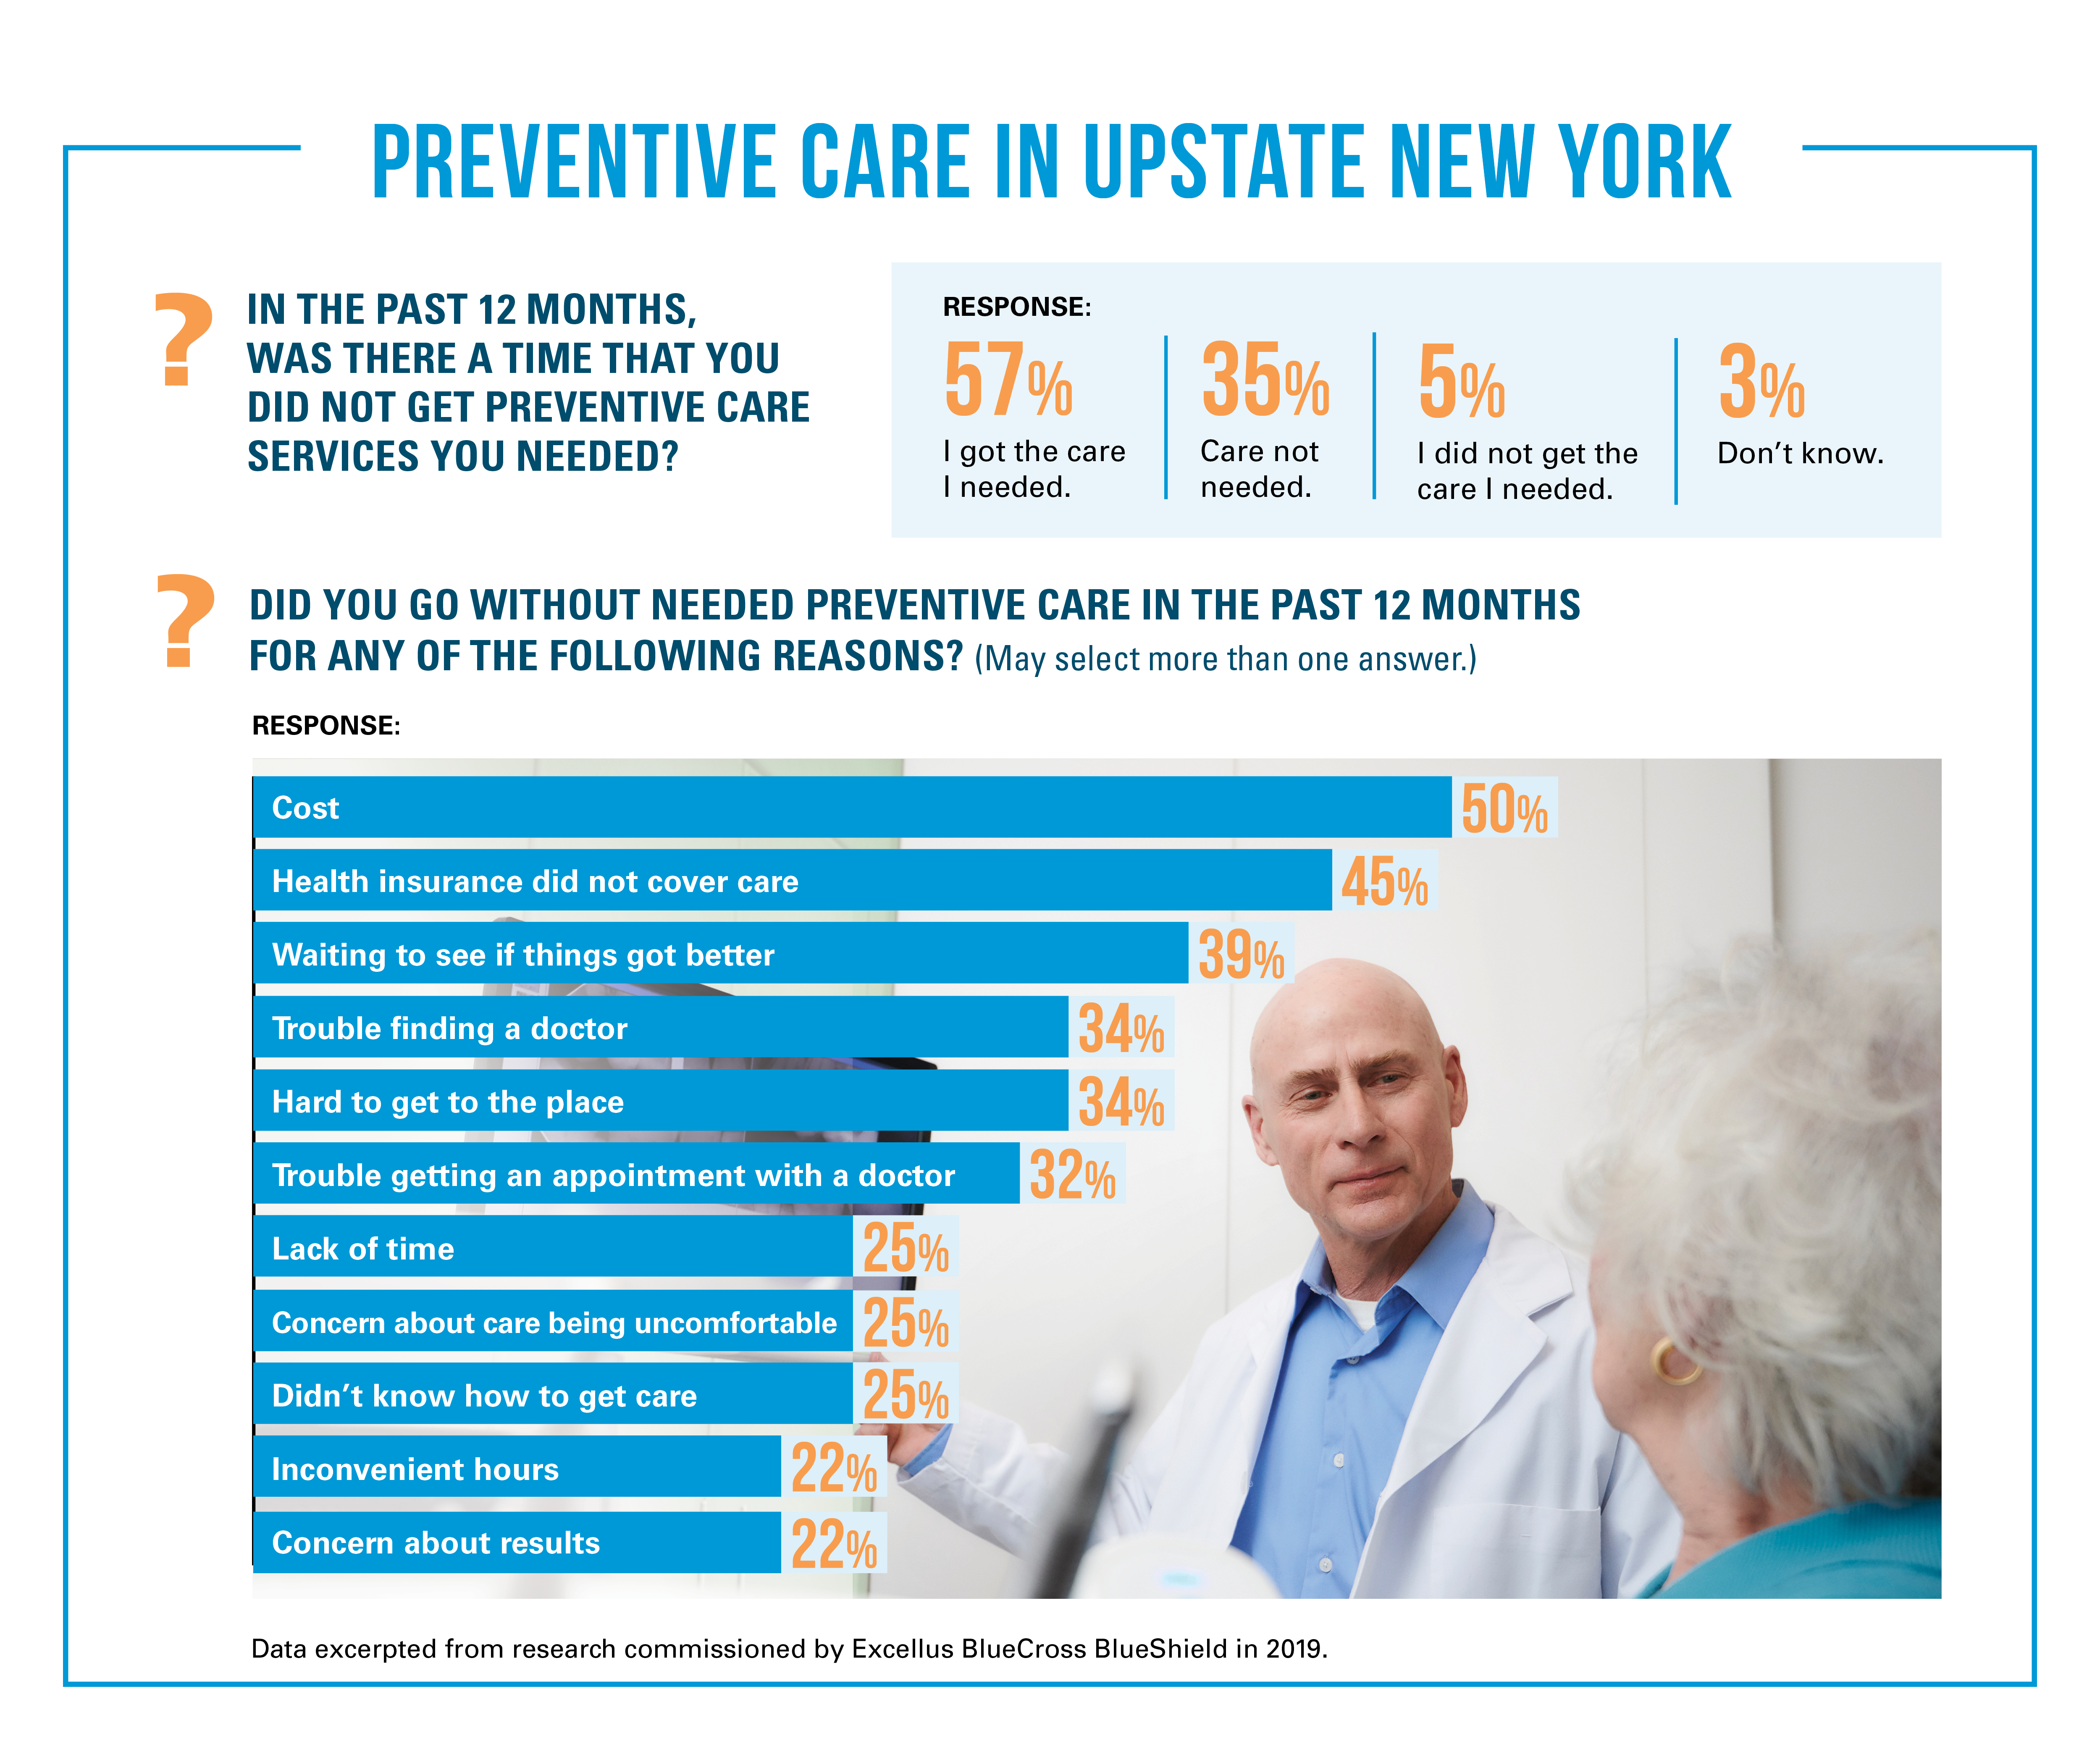 35% of respondents thought they did not need preventive care in the past year. Of those who said they needed care but did not get it (5%), they cited cost and lack of coverage as reasons for missing it. 